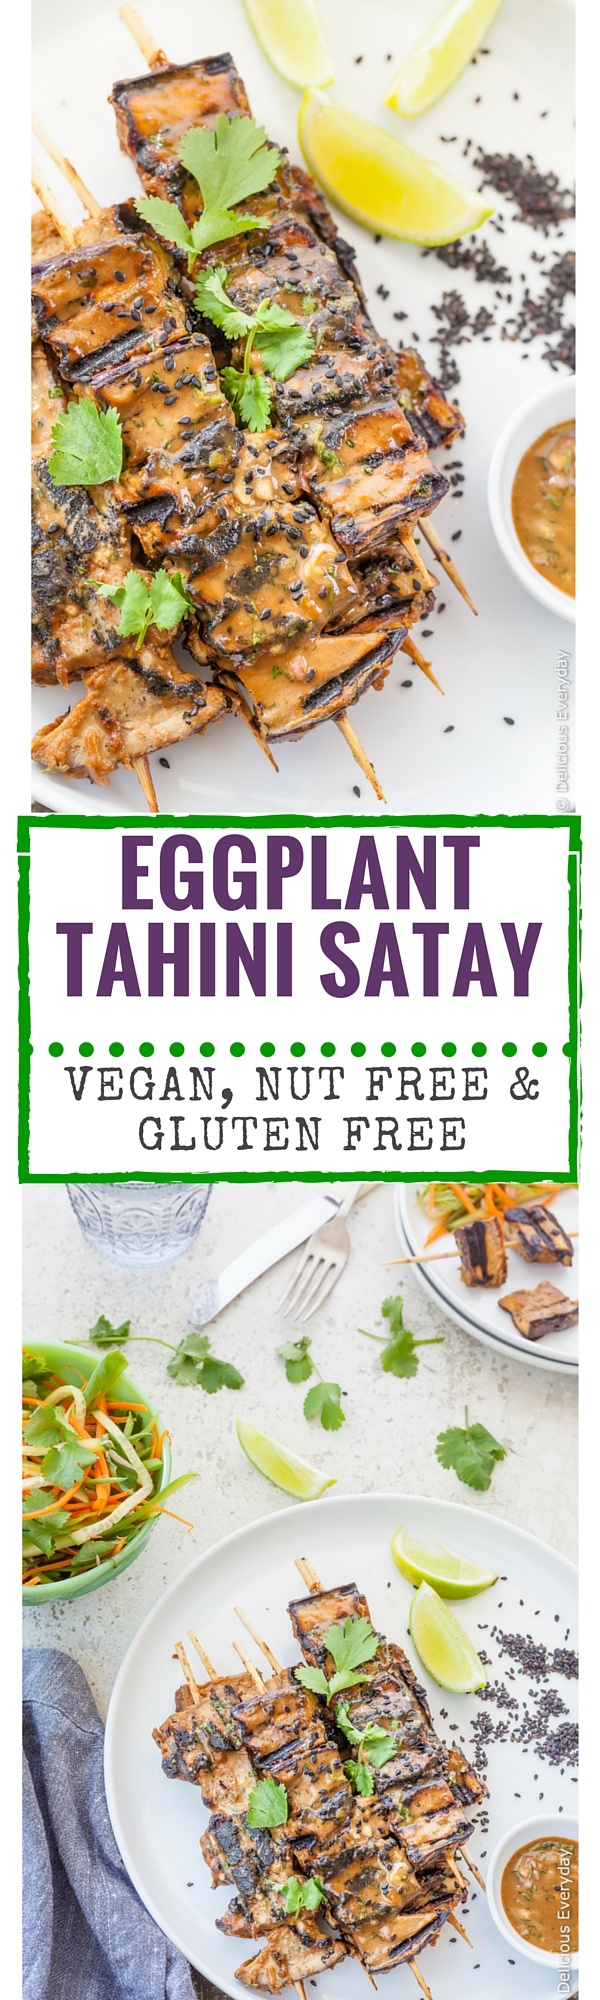 These Grilled Eggplant Kebabs are grilled until soft and lightly caramelised in a tahini satay marinade. A fun twist on the traditional satay recipes that is vegan, nut free & gluten free.